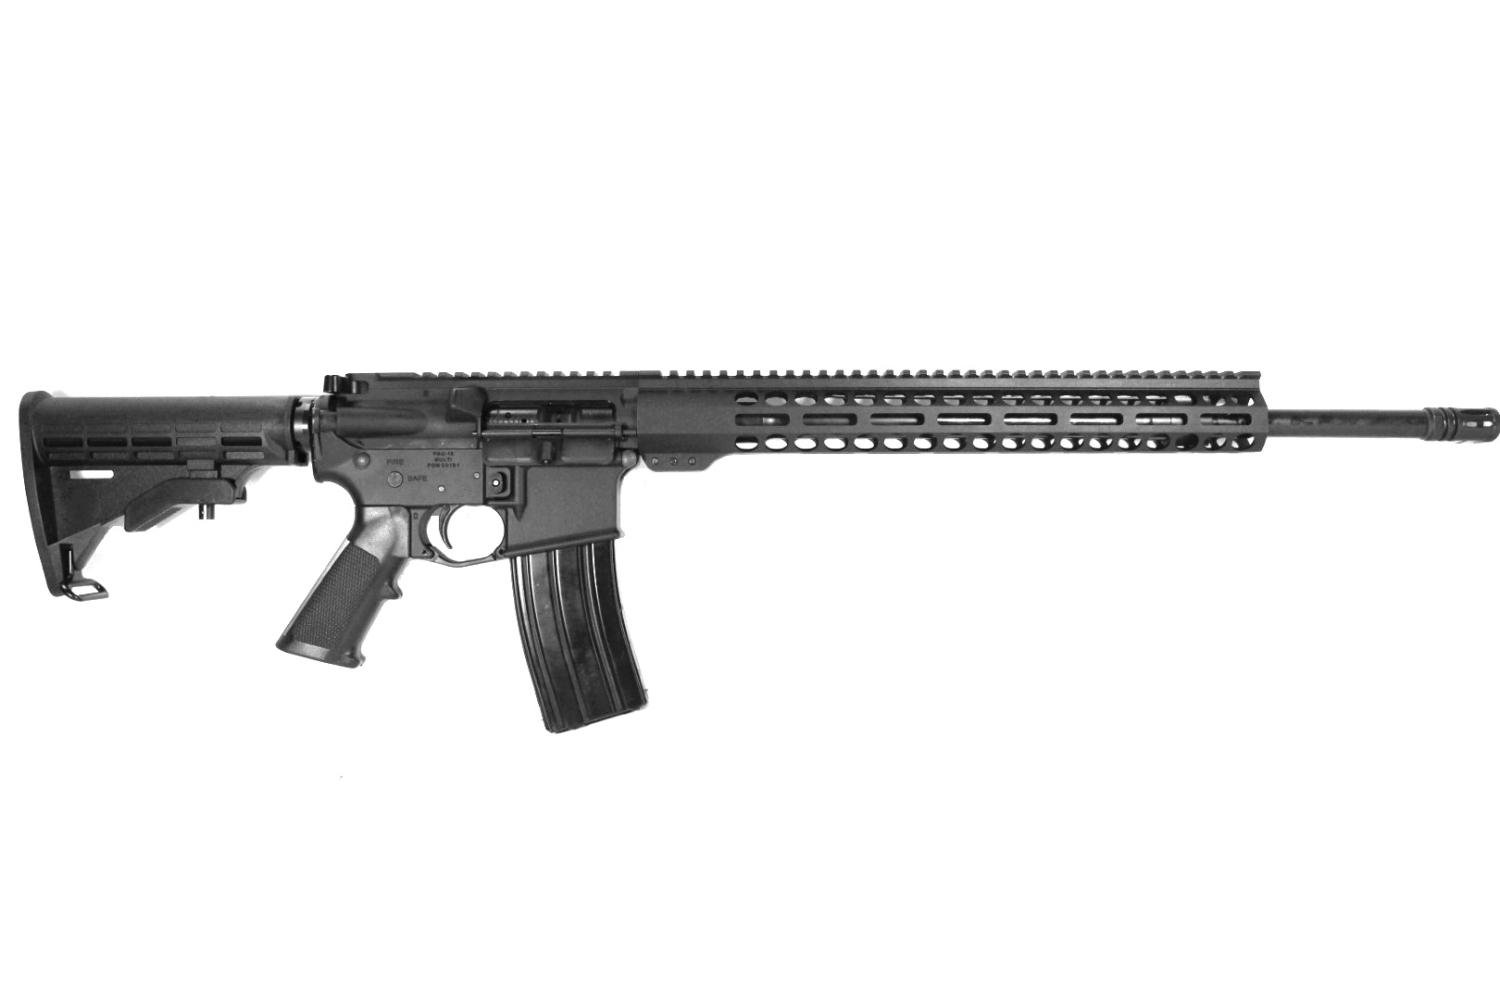 P2A "Patriot" 20 inch AR-15 6.8 SPC II M-LOK Complete Rifle - $773.49 after 15% off coupon